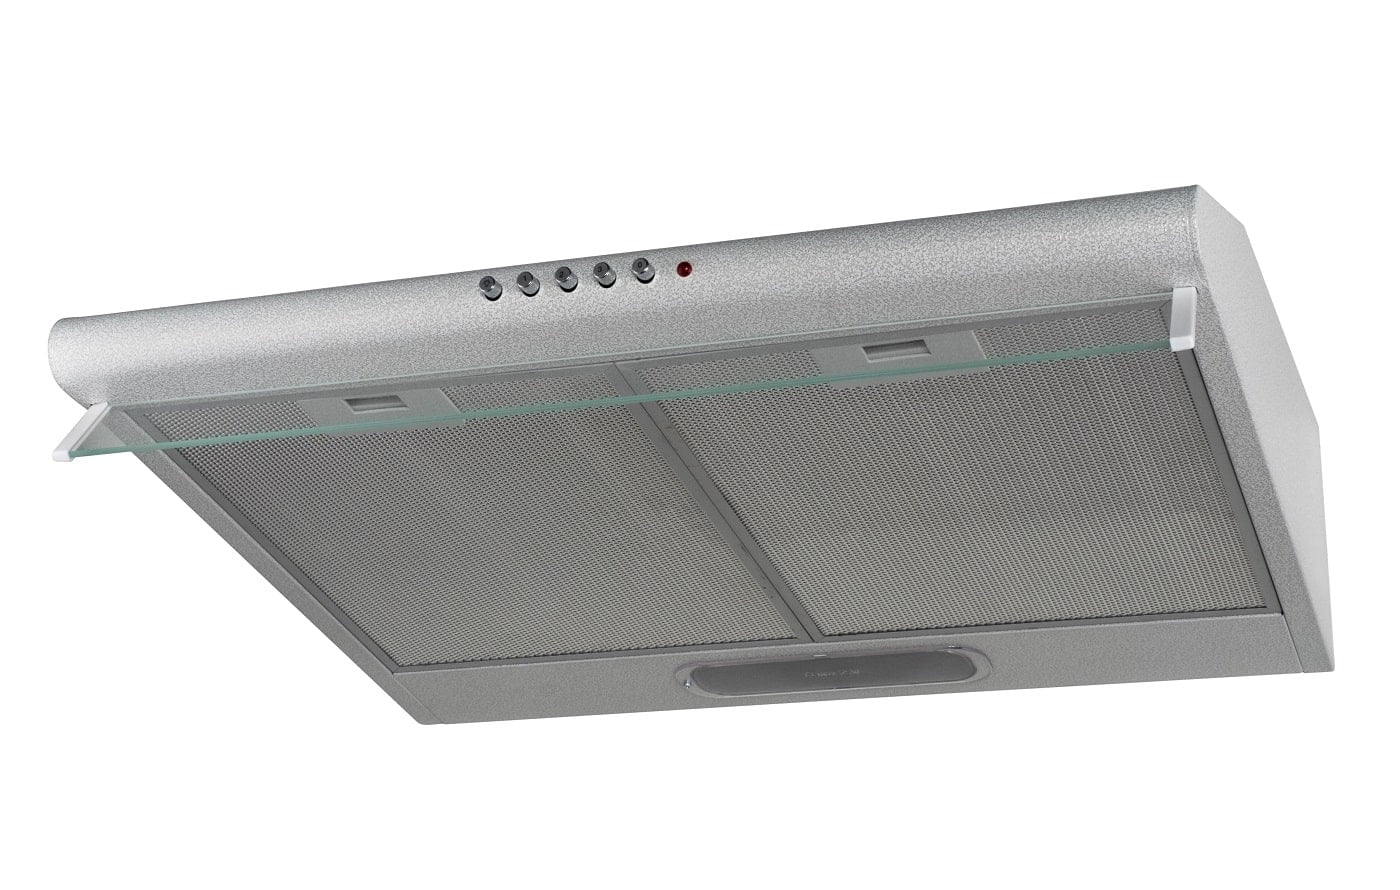 Cooker hood. The design is flat, wall mounted. Grey colour. Isolated. Ductless Range Hood Buying Guide.